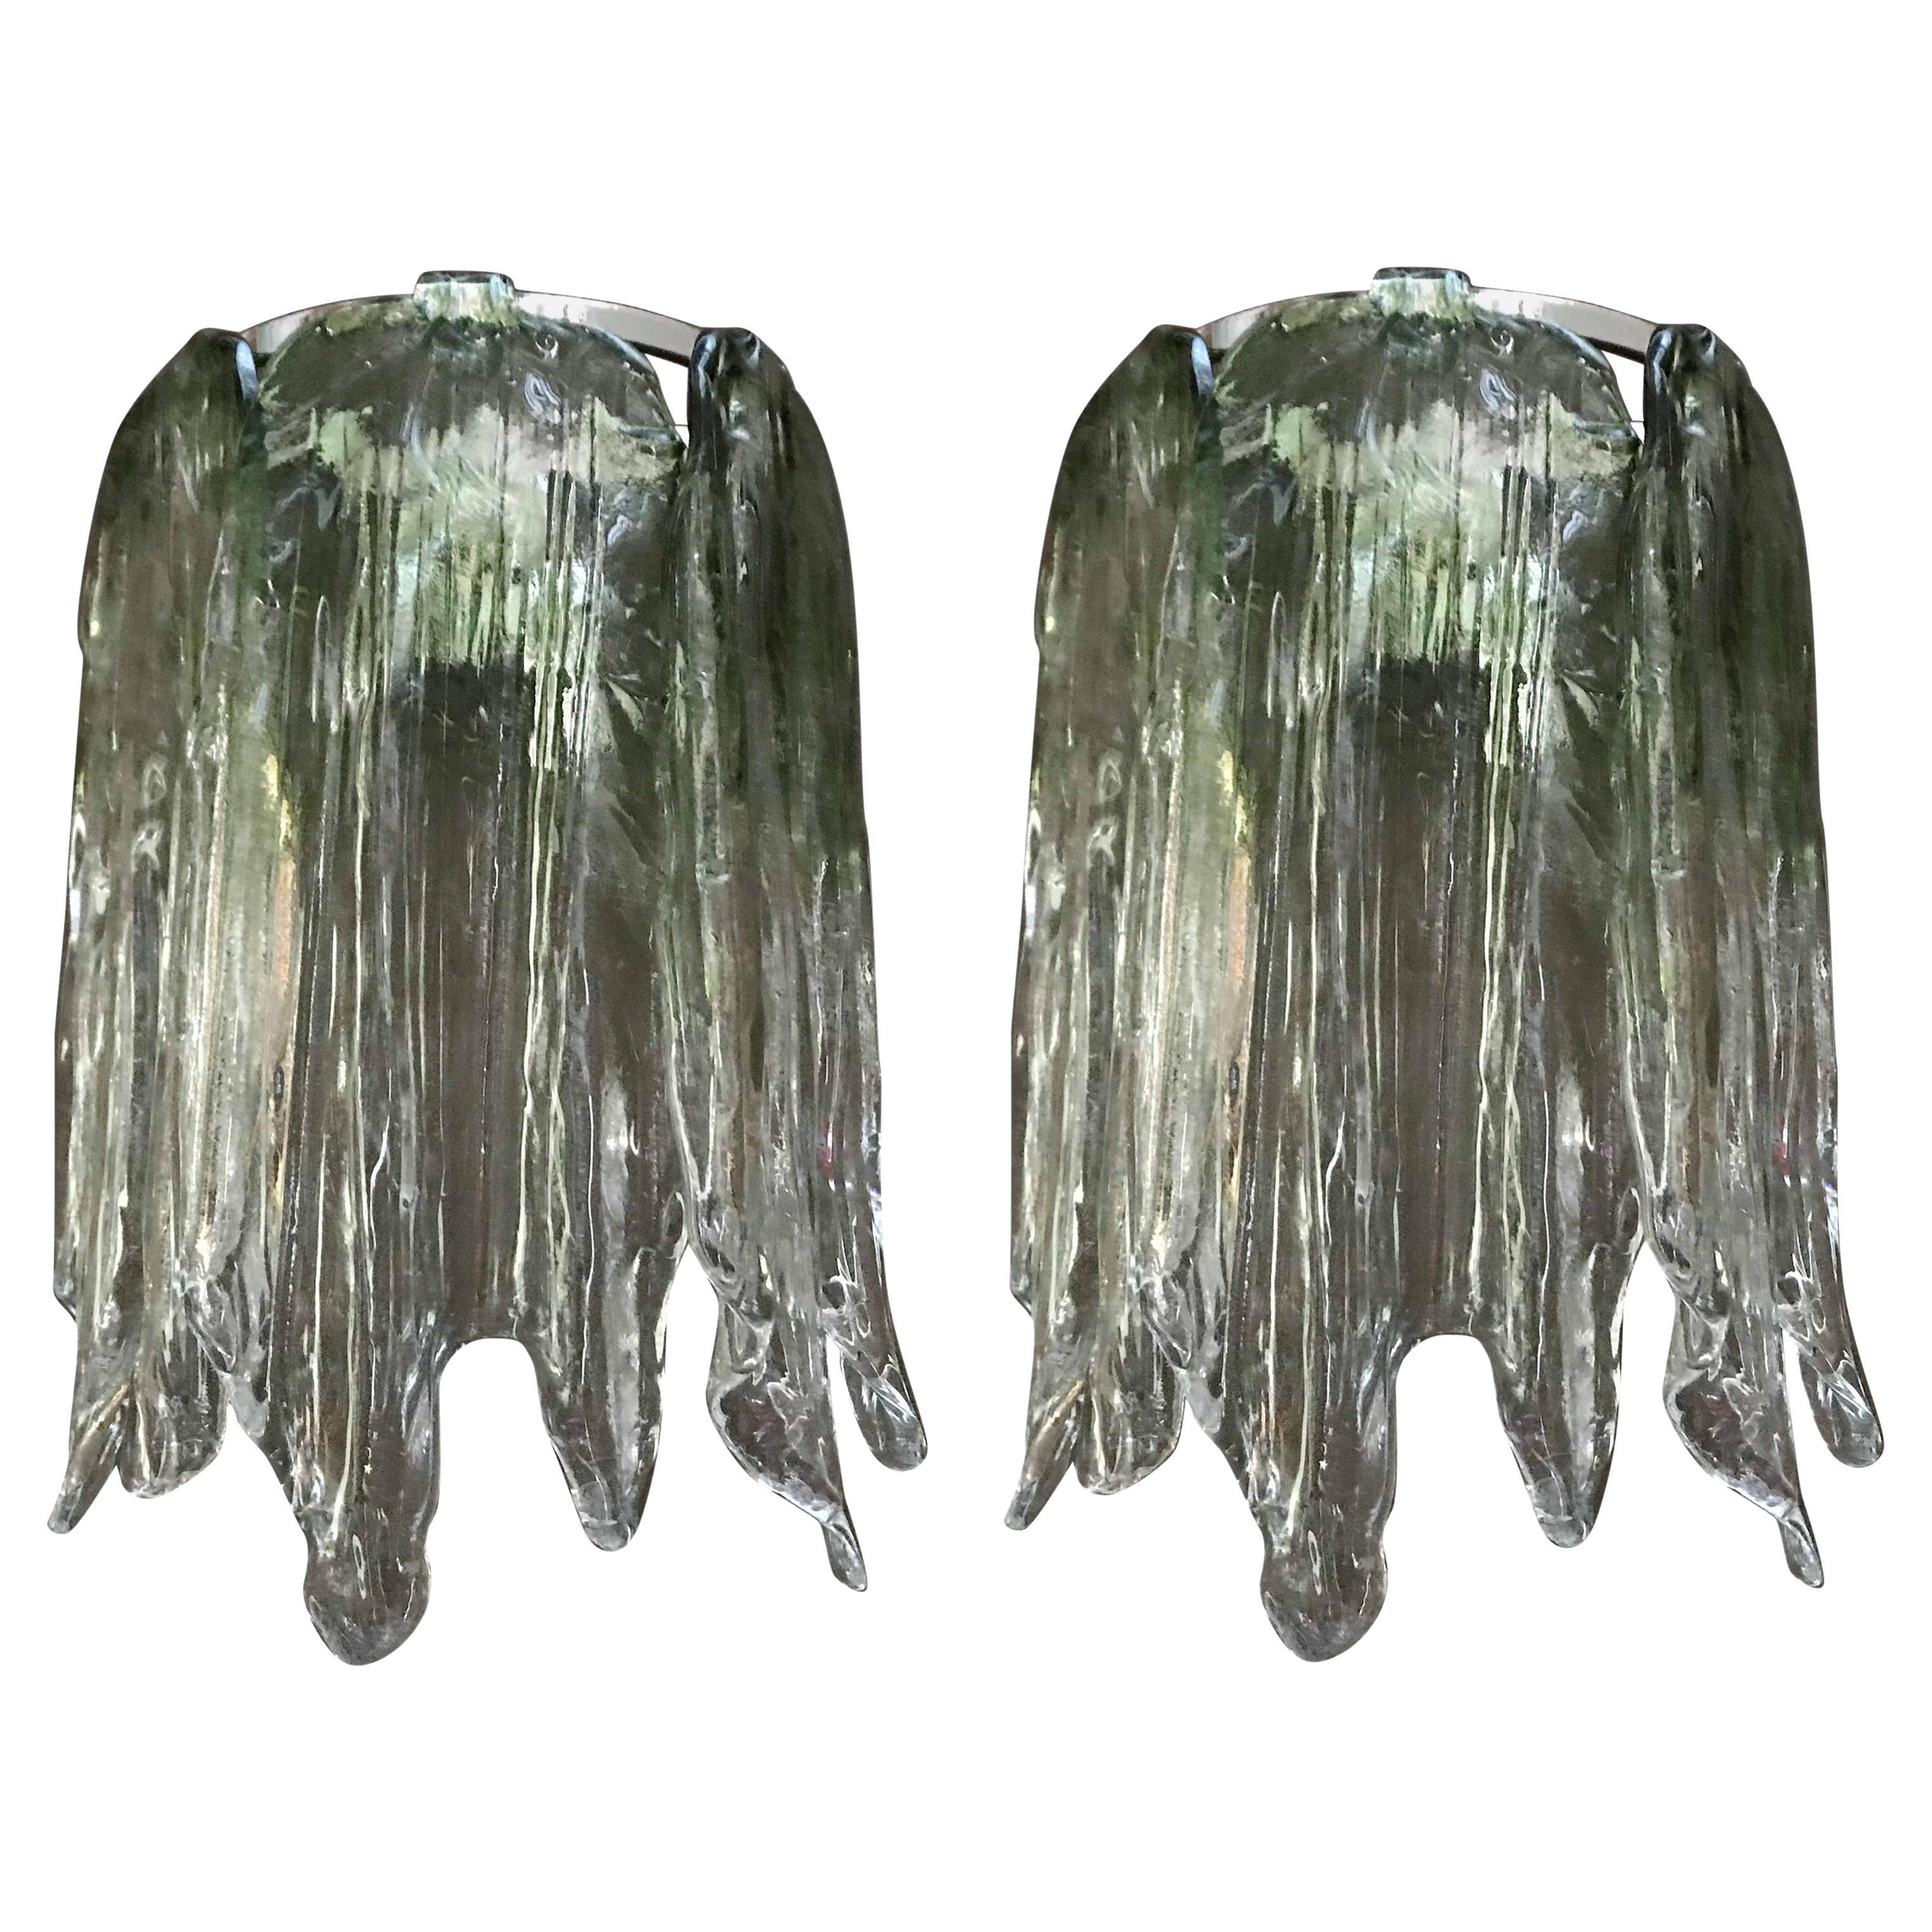 Pair of Fiamme Sconces by Mazzega